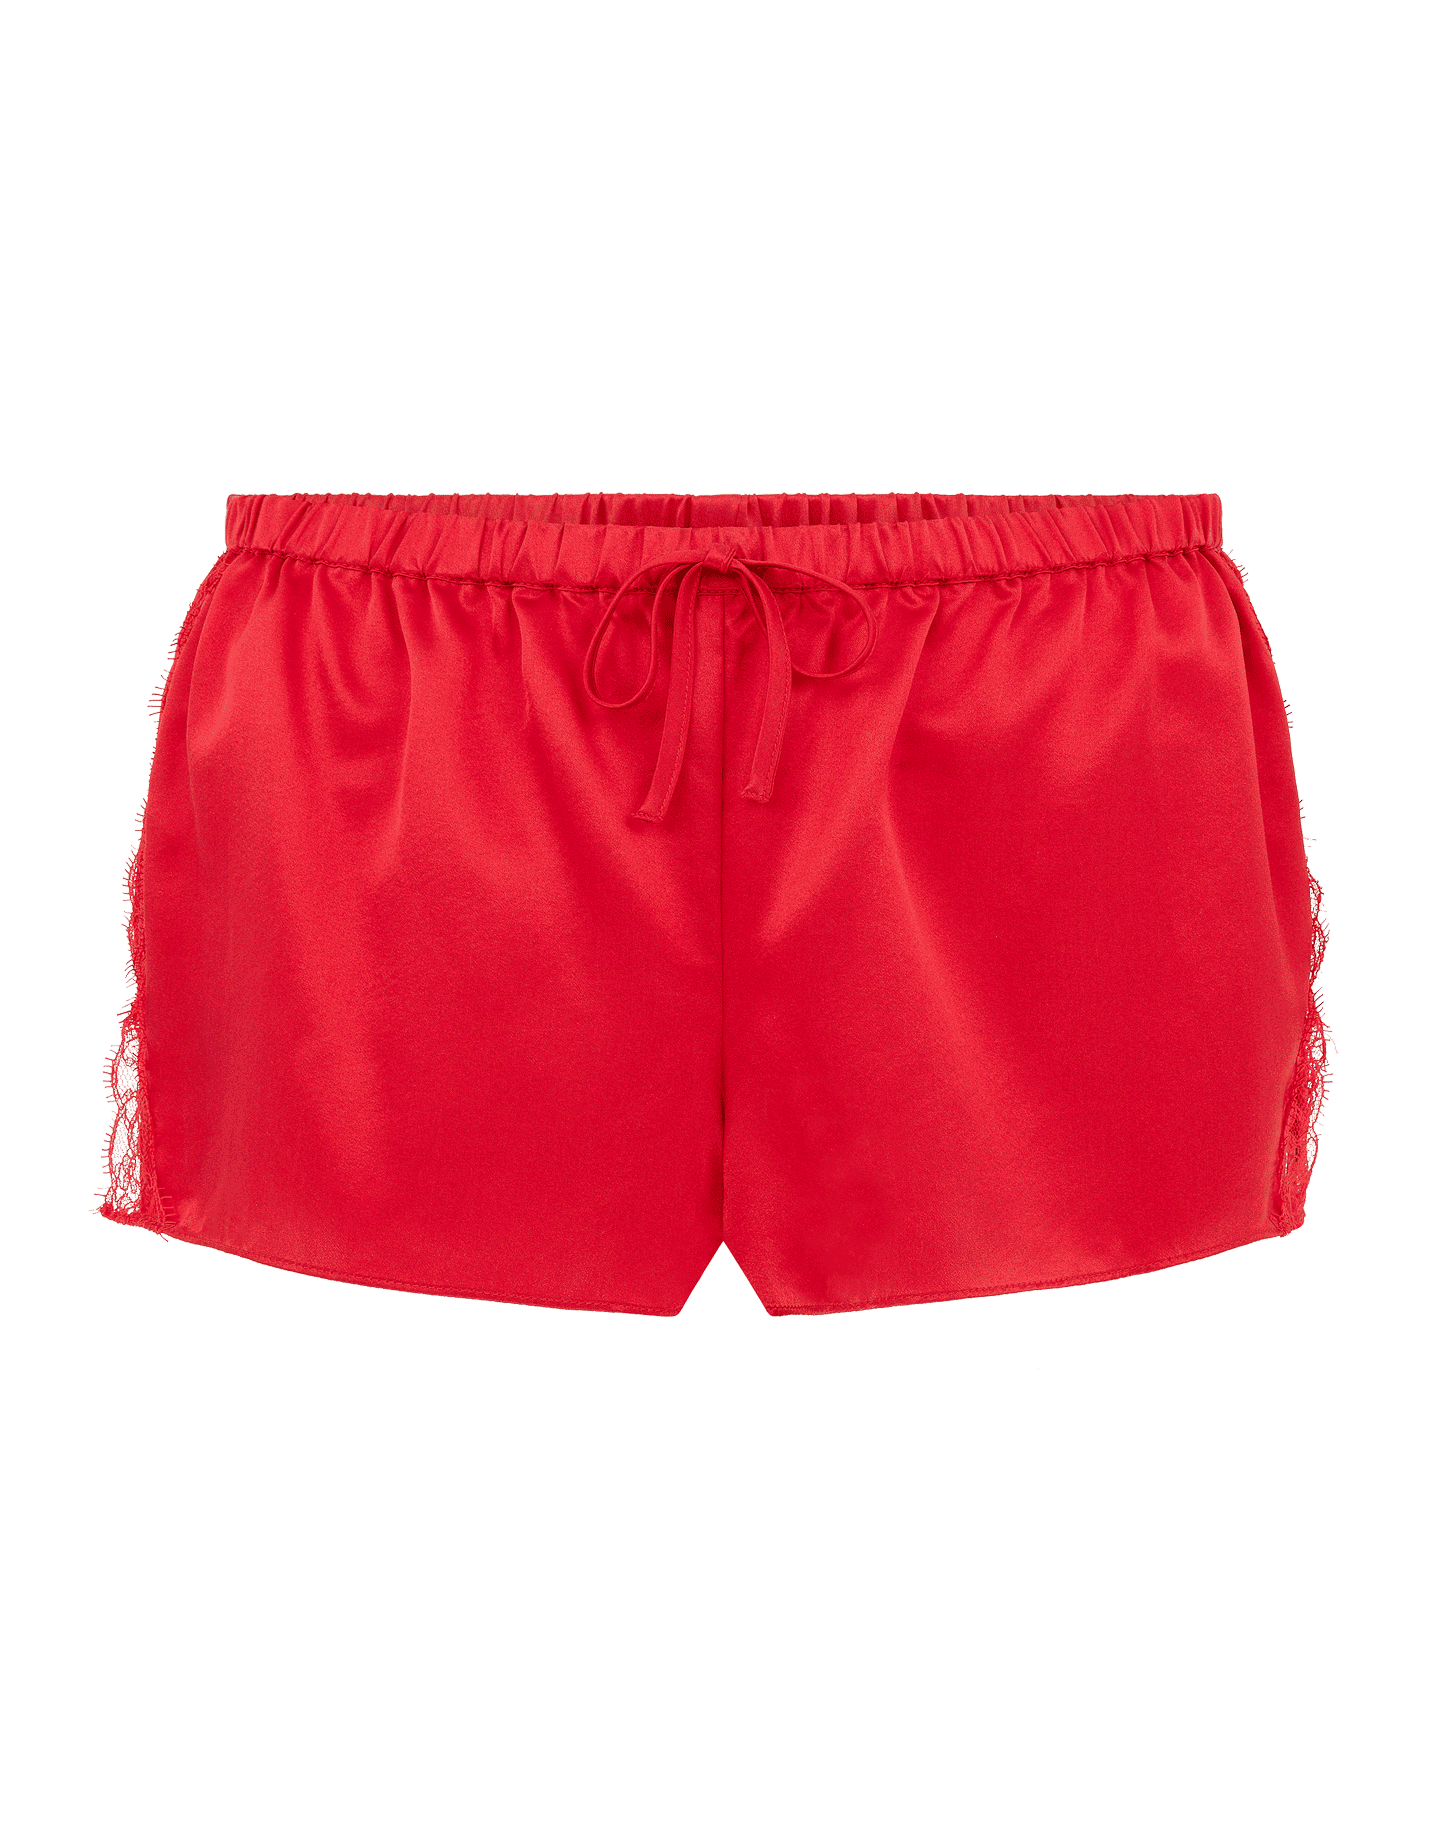 Gisele Shorts in Red | Agent Provocateur Outlet